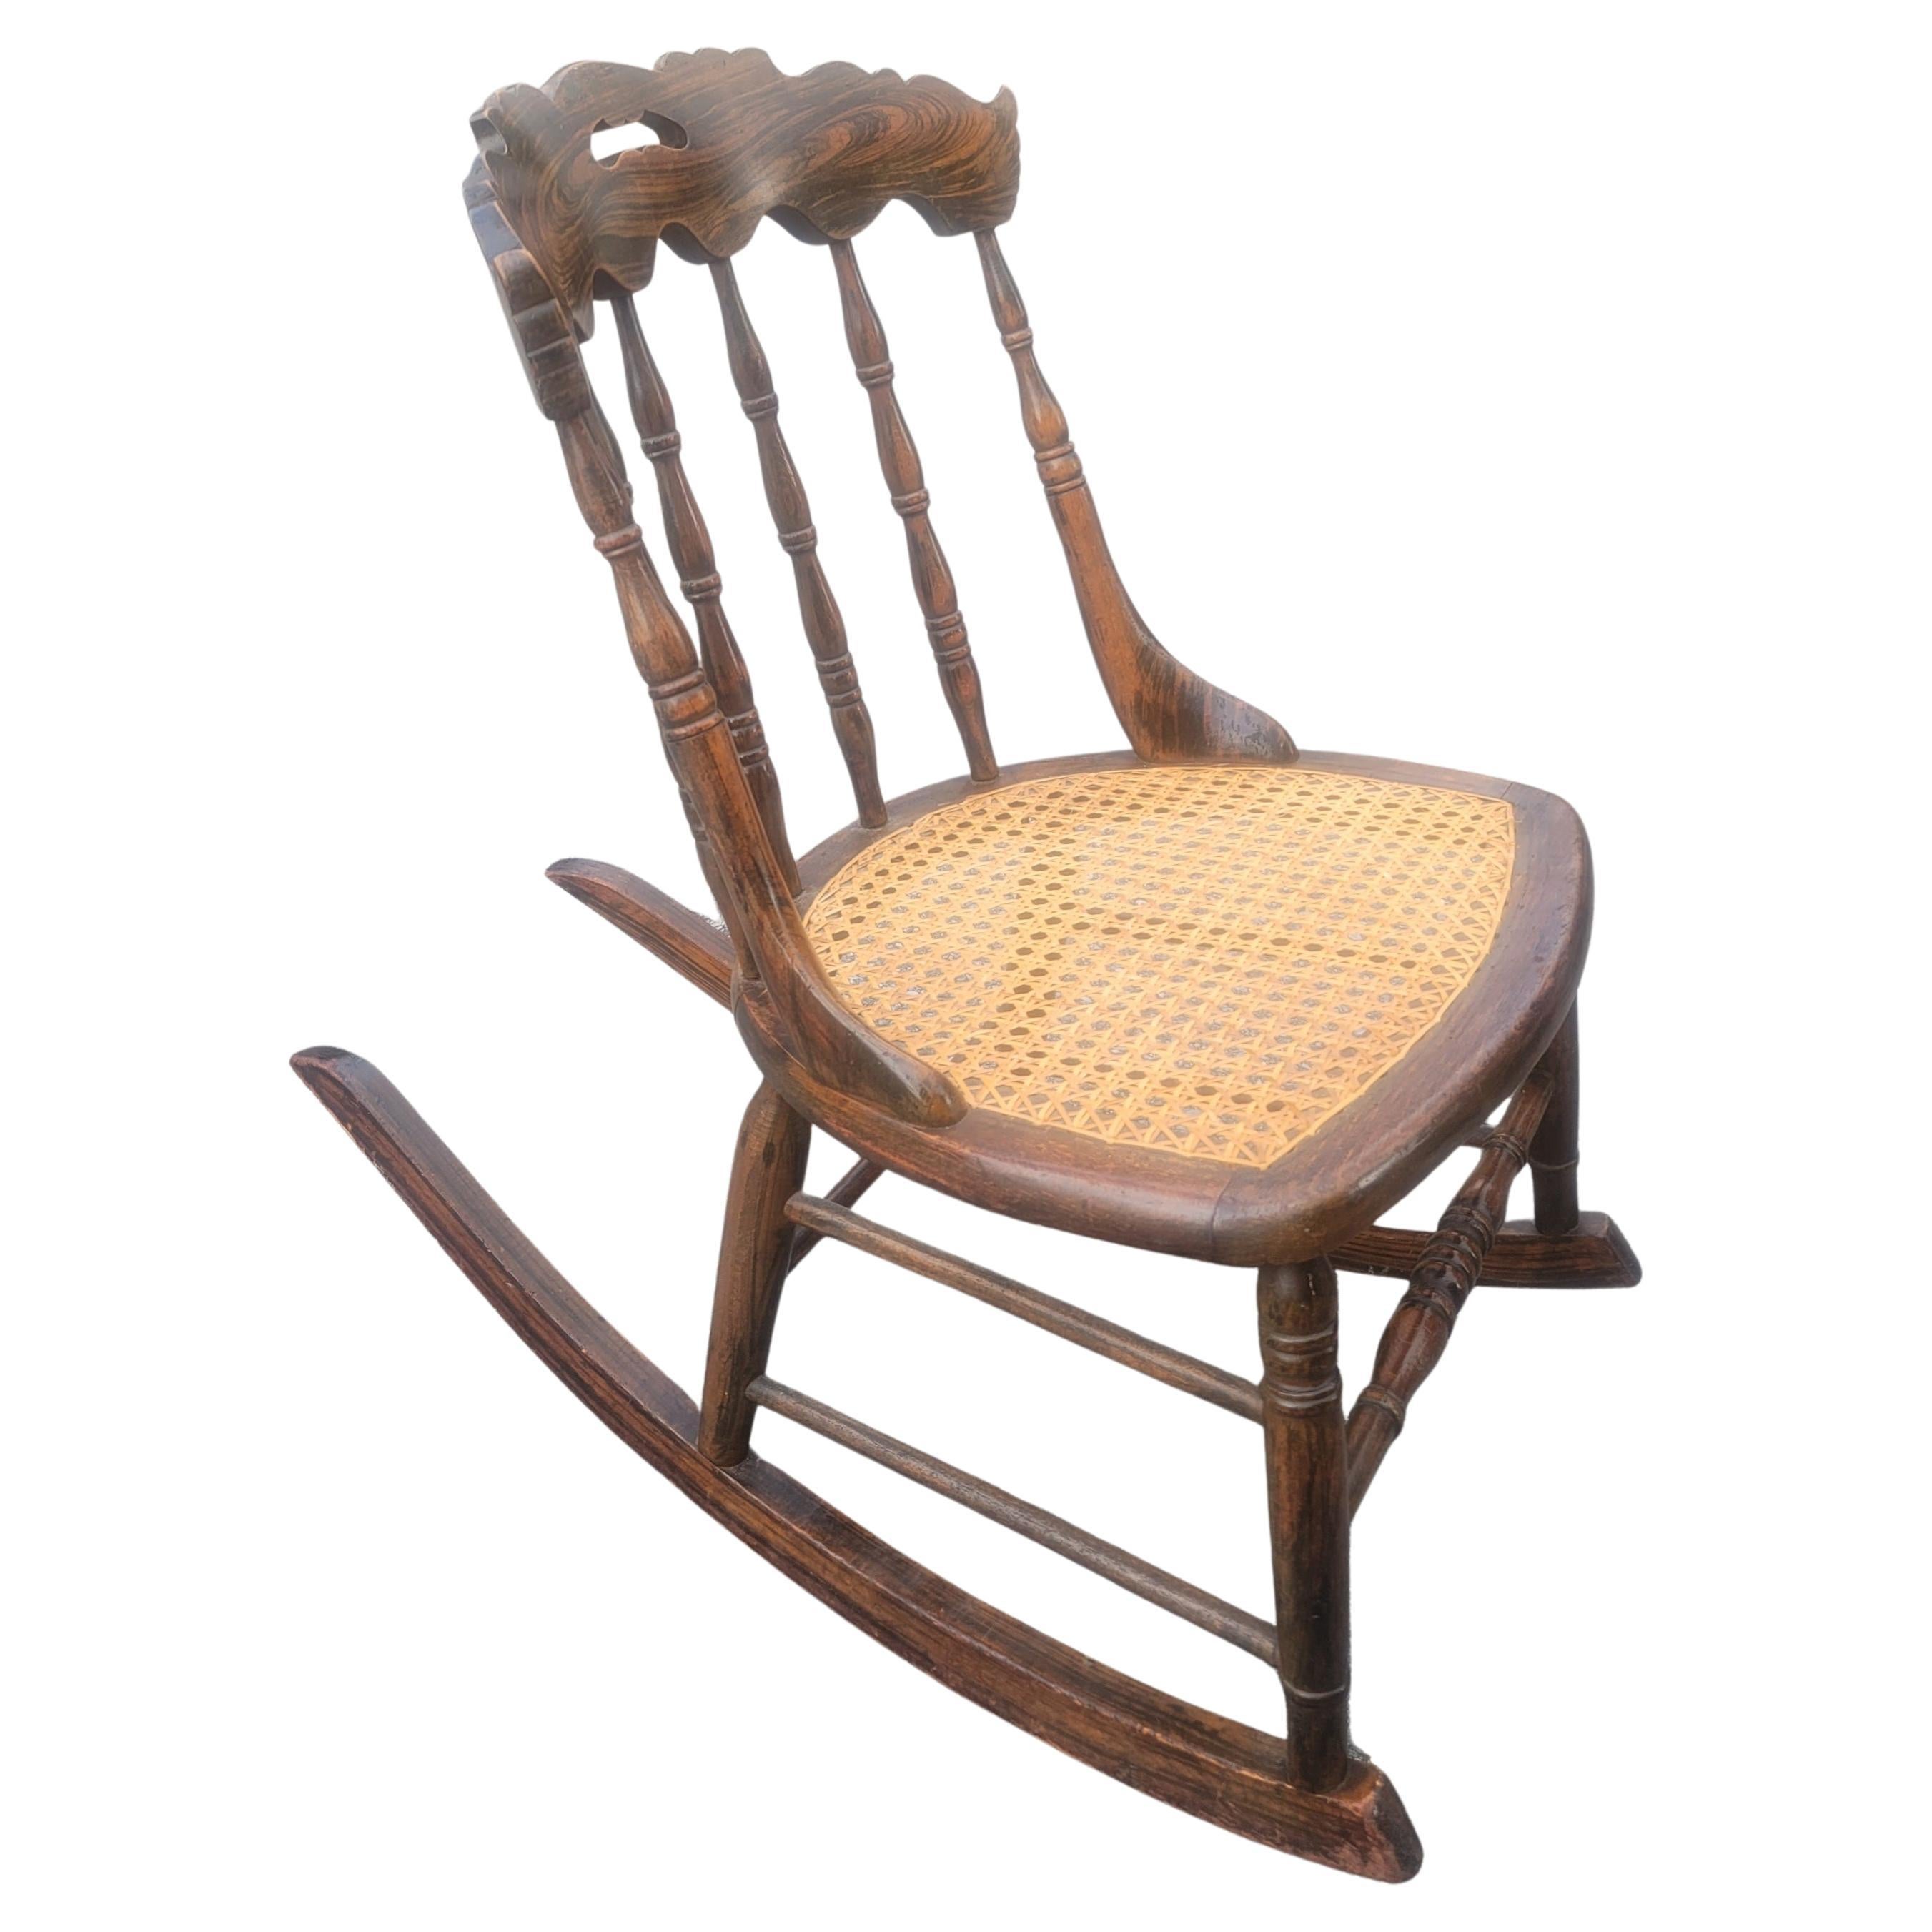 A exquisite vintage medium size walnut and cane seat rocking chair in tiger walnut. Newer caning. Very good vintage condition.